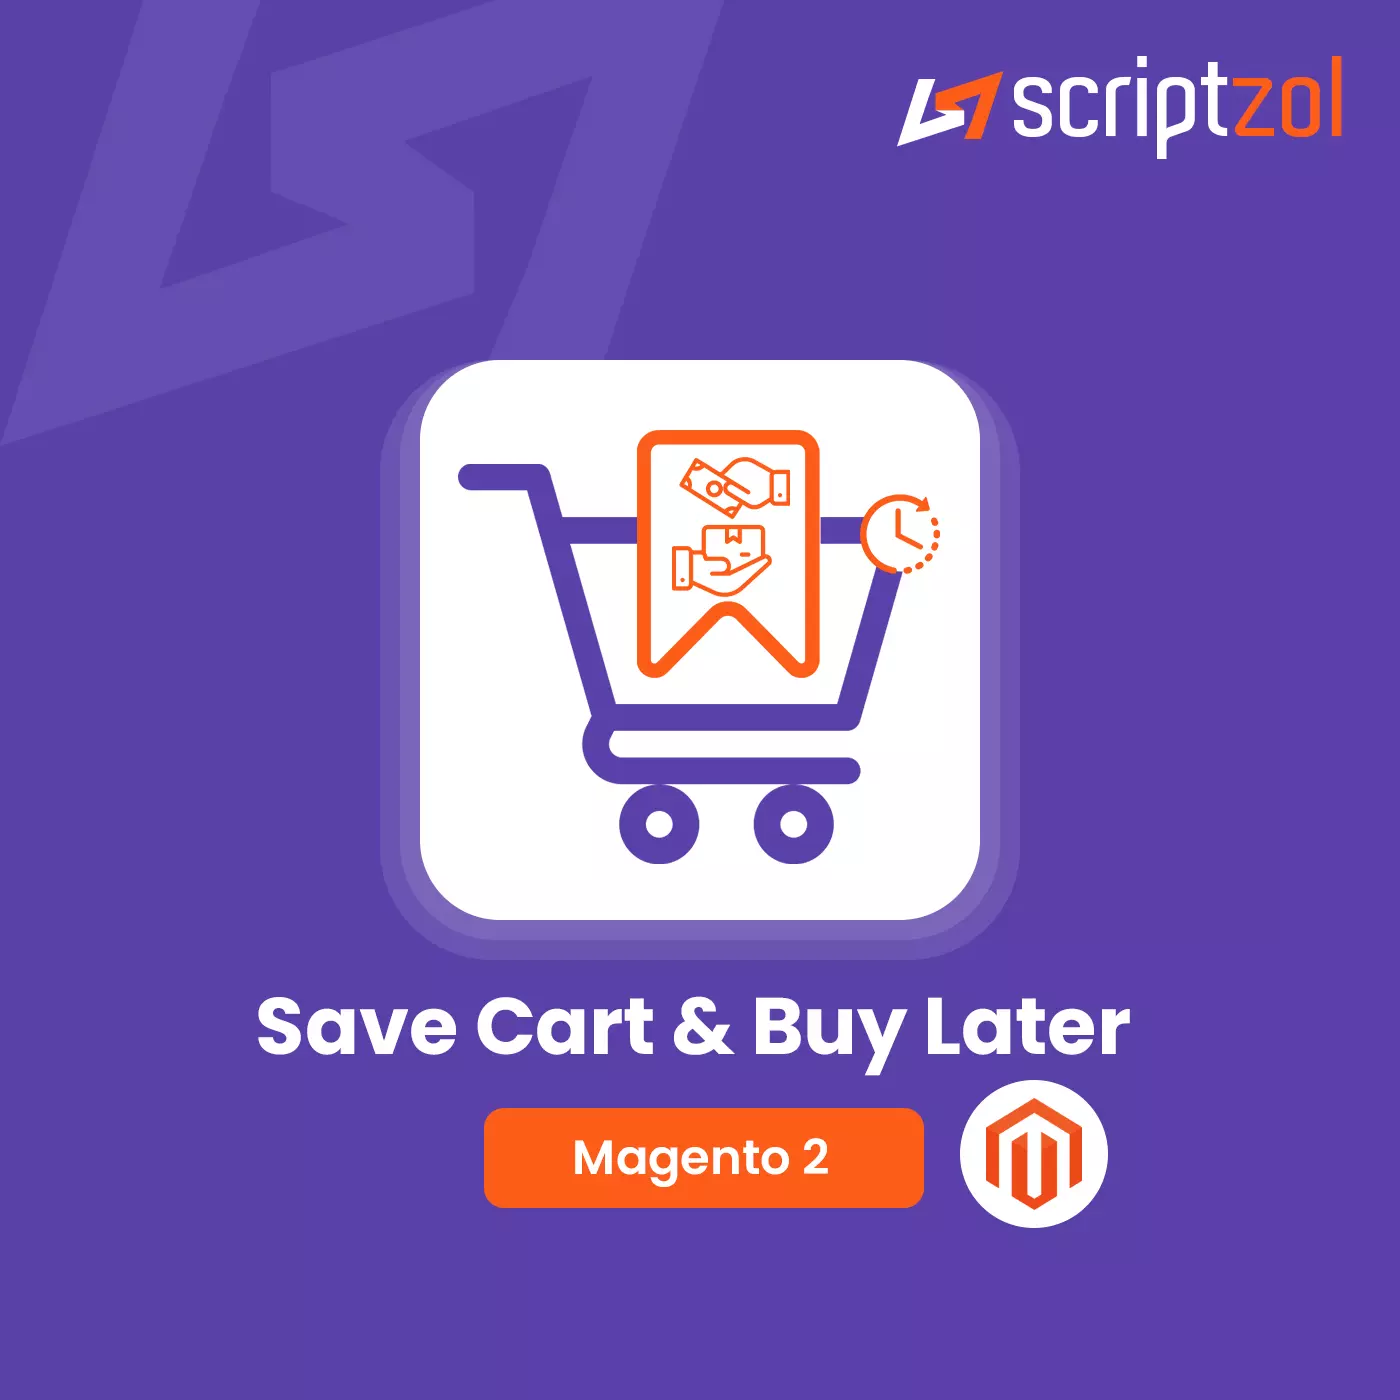 https://www.scriptzol.com/assets/img/product/magento-2-save-cart-and-buy-later.webp